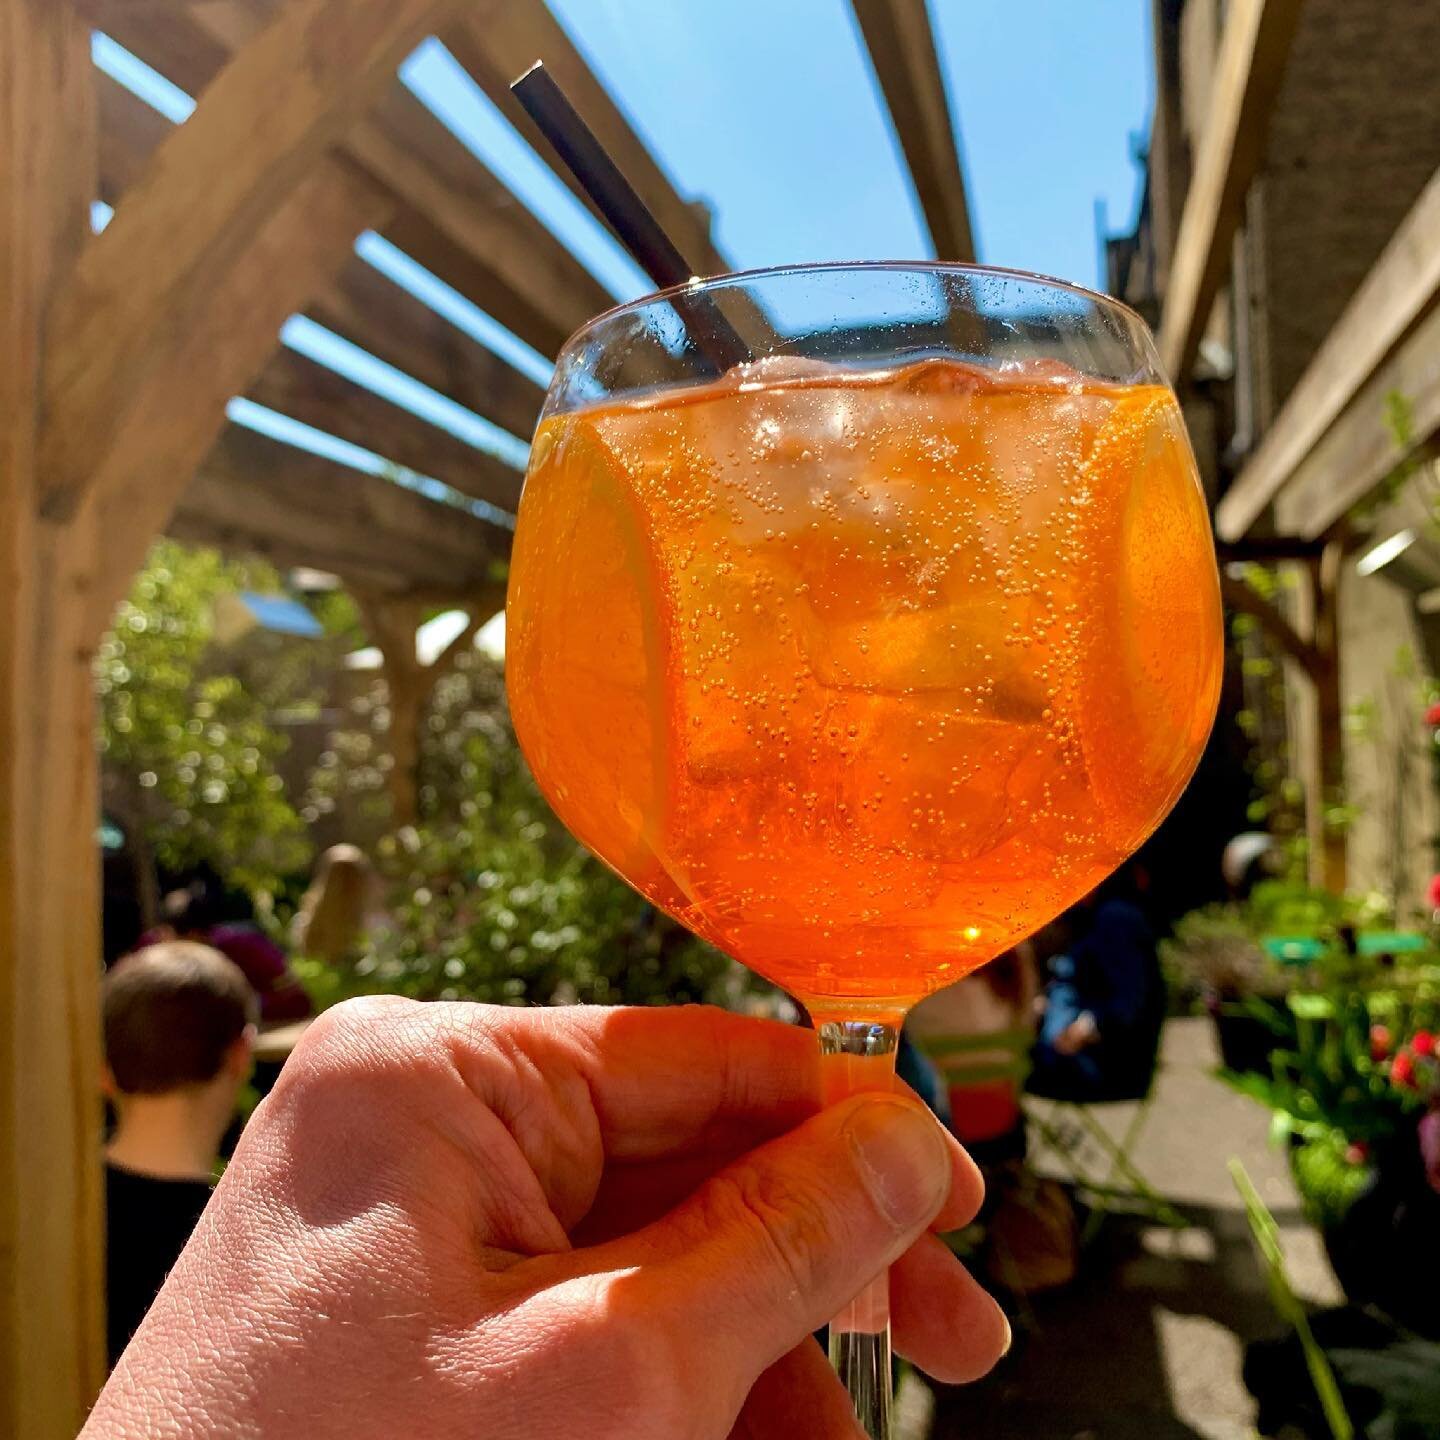 A sunny weekend in our beautiful garden.

It&rsquo;s been so wonderful to have people again enjoying the PARISSI ambiance and our tasty food in our new upgraded garden space with drinks and laughter.  Long waited for! 

Thank you all for being so und